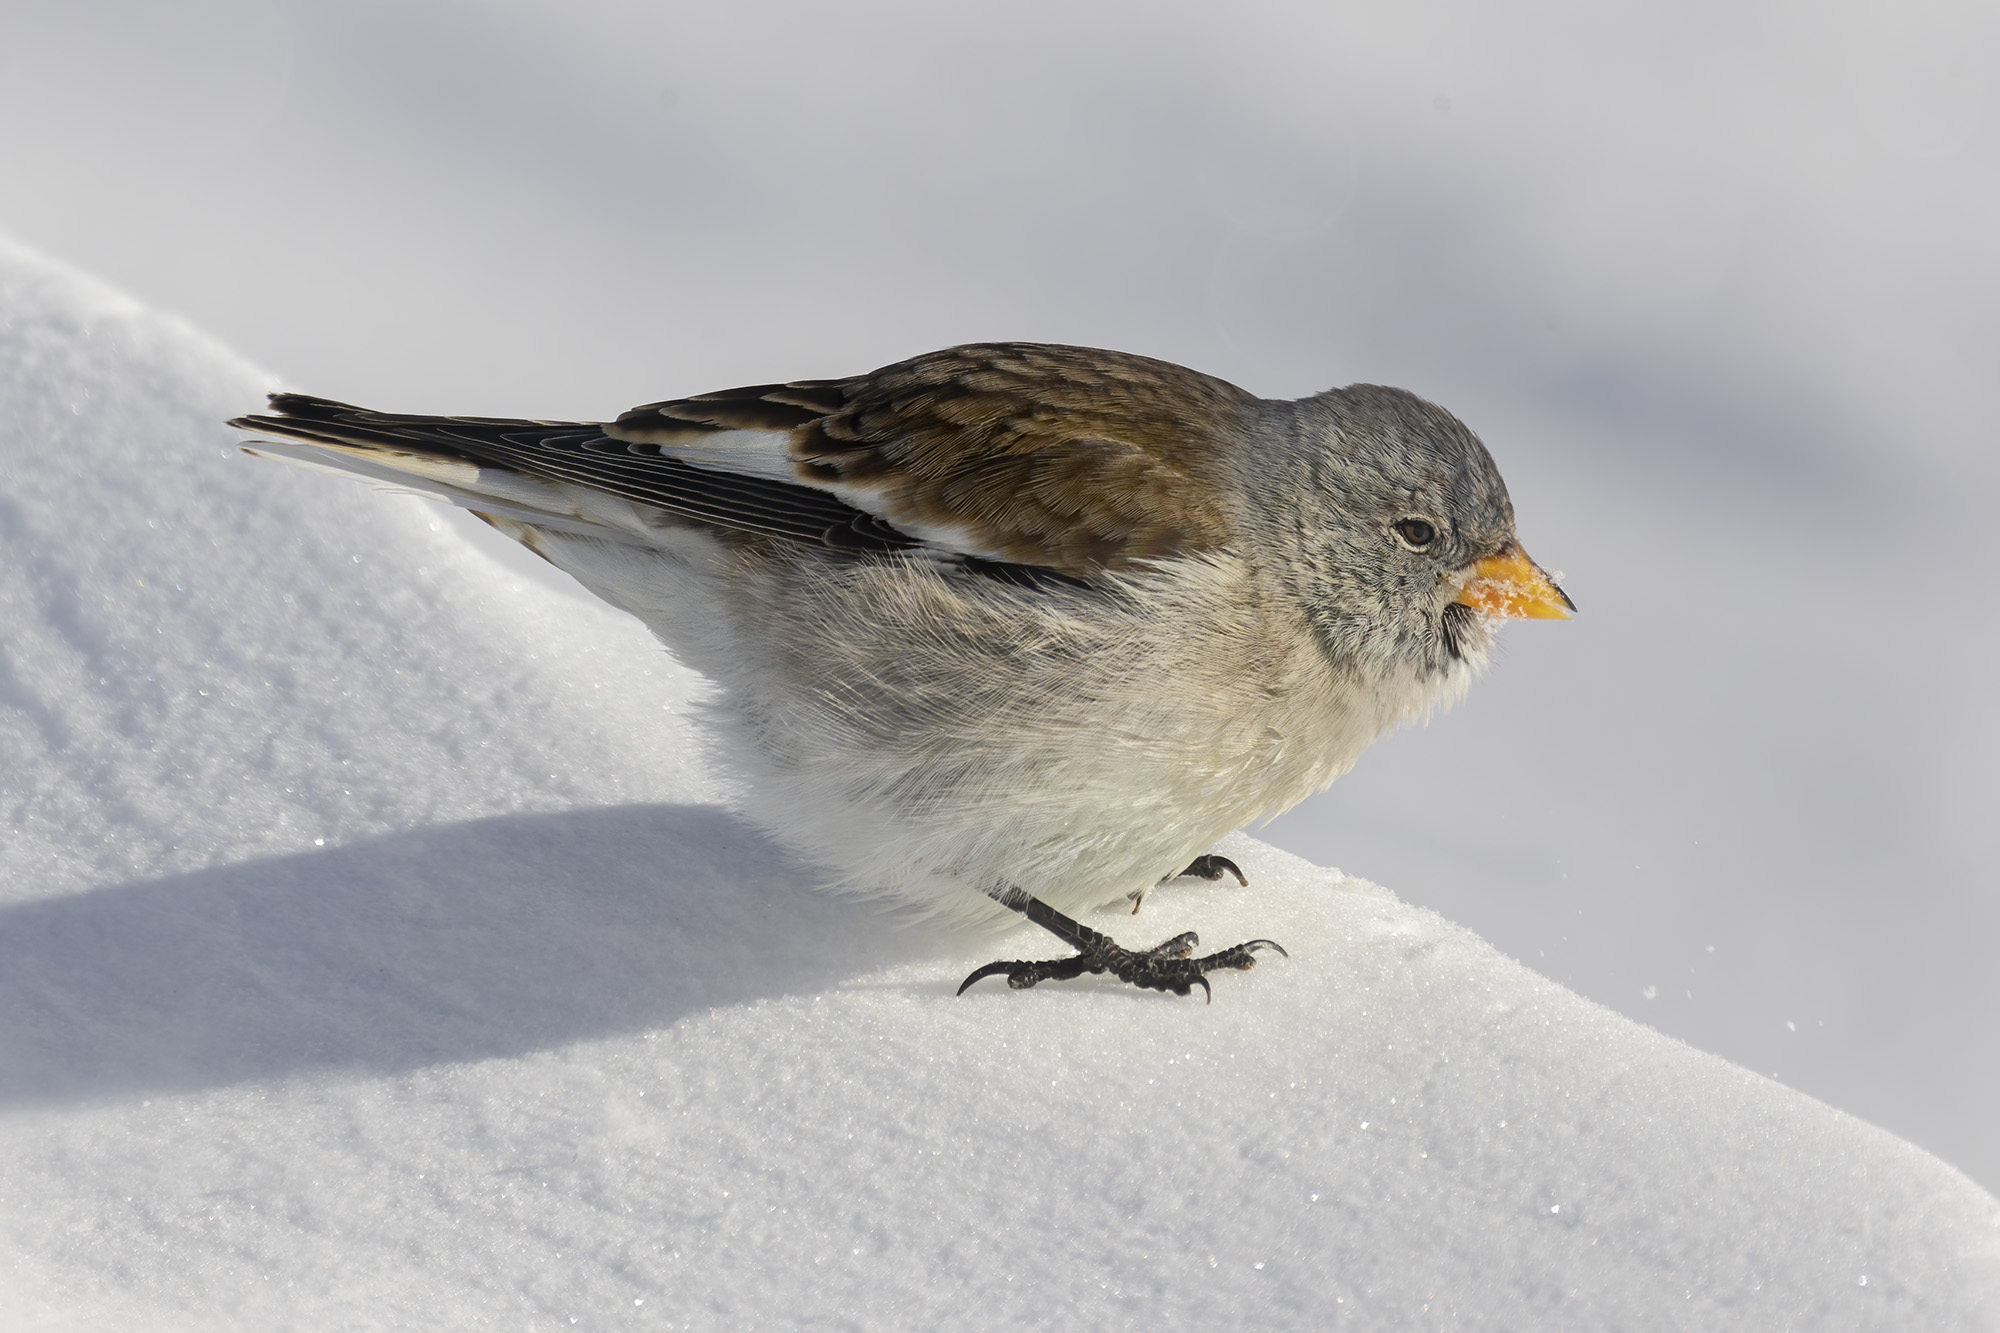 The Alpine Chaffinch and the snow...